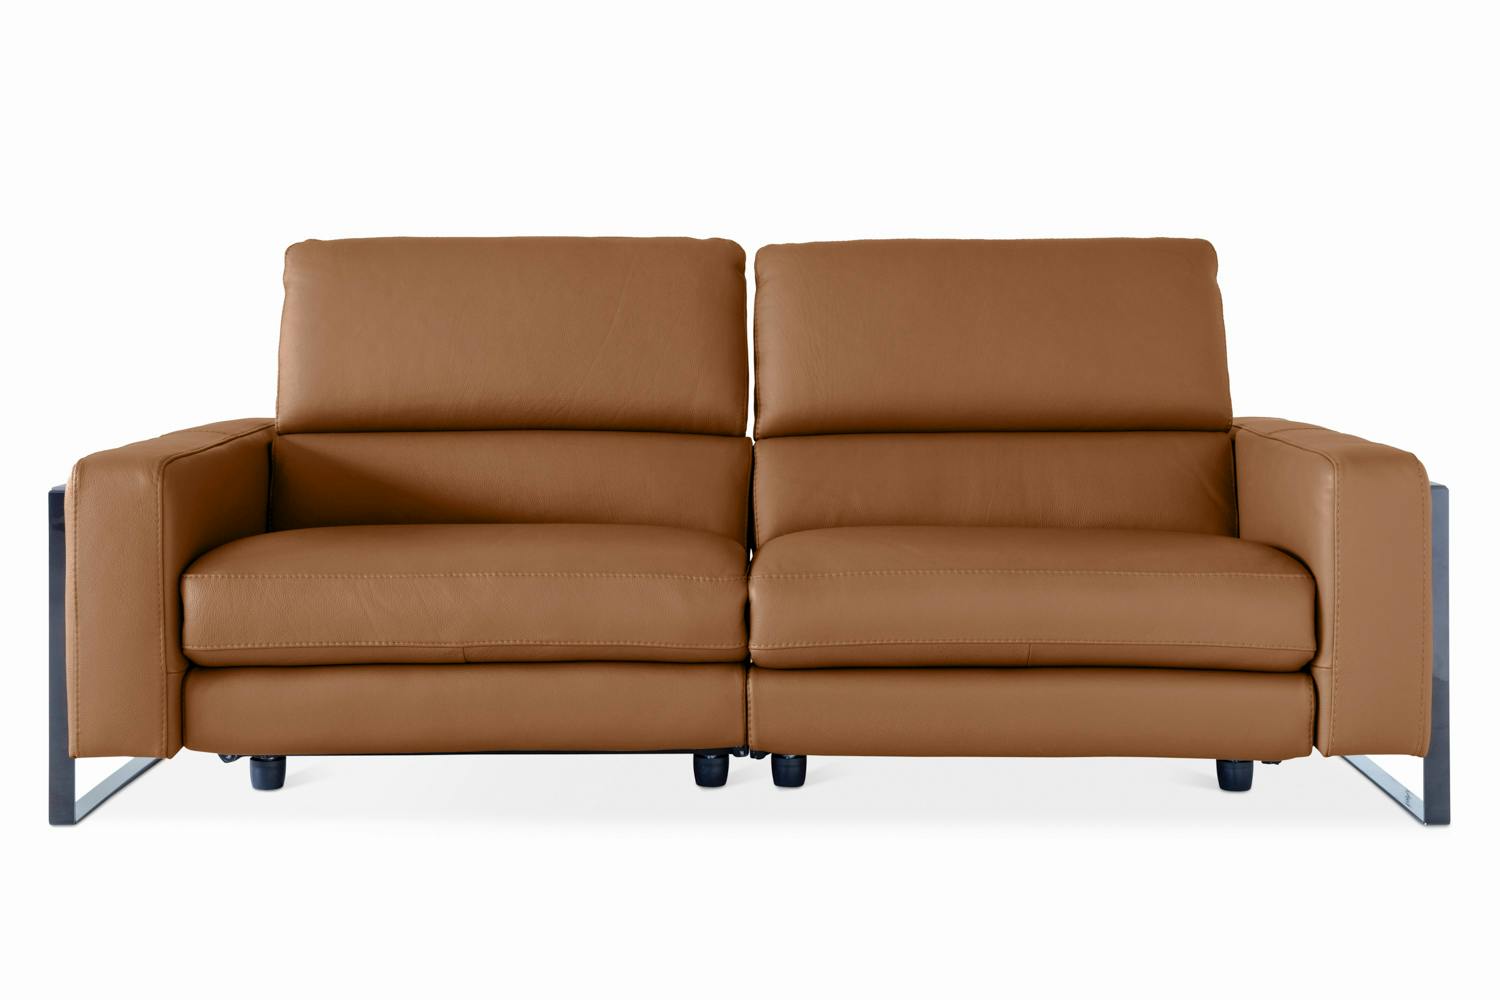 Renzo 3 Seater Sofa | Electric recliner | Colour Options